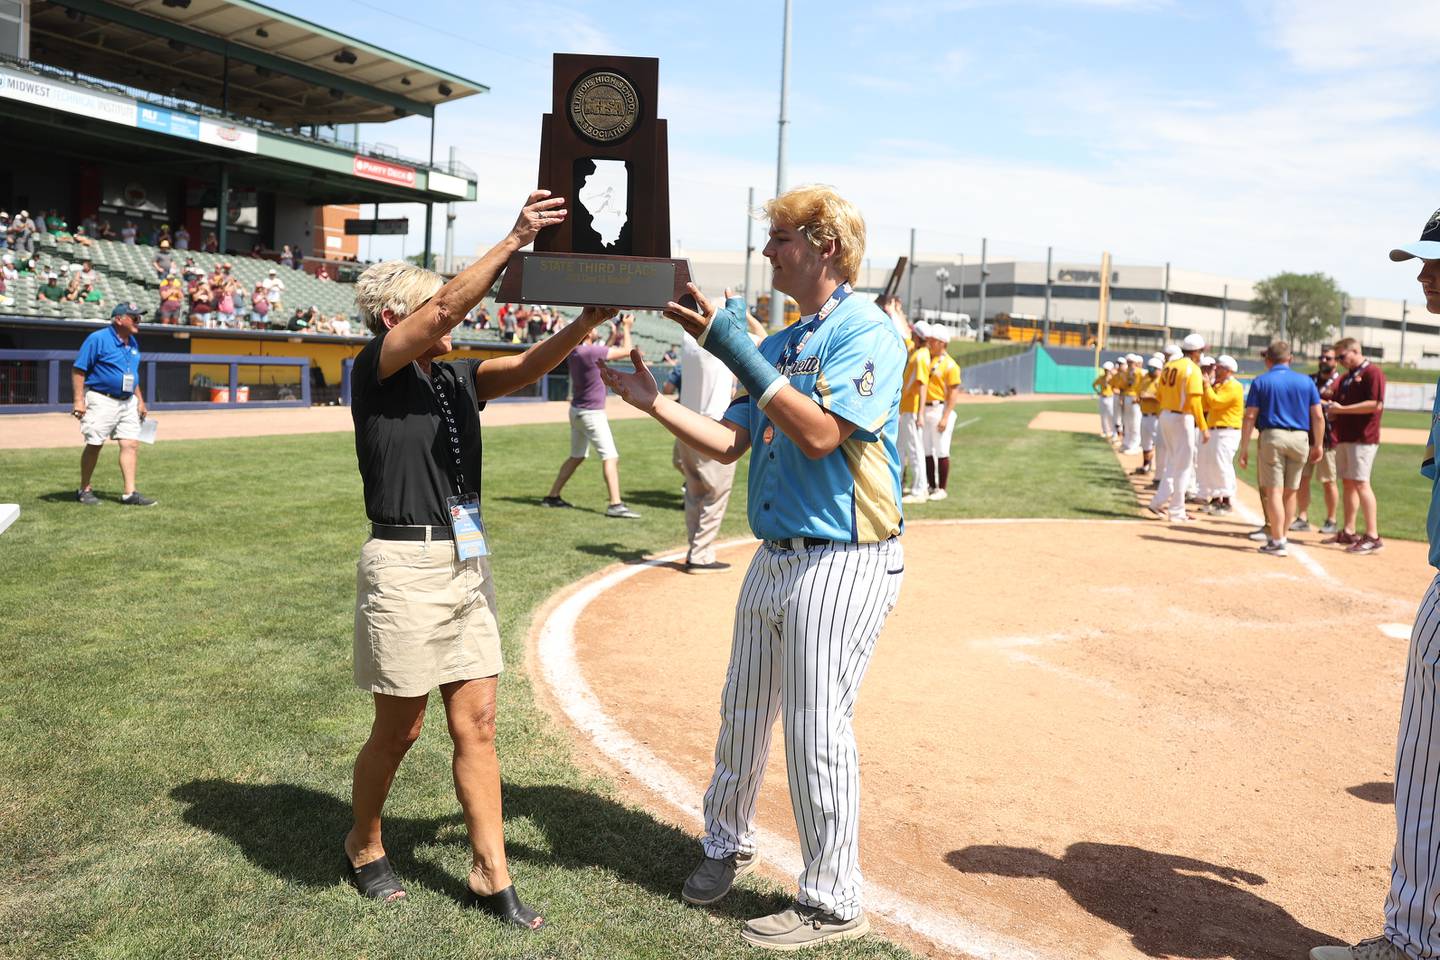 Marquette’s Brady Ewers receives the 3rd place trophy after the Crusaders 12-0 win over Leroy in the IHSA Class 1A 3rd place game. Saturday, June 4, 2022 in Peoria.